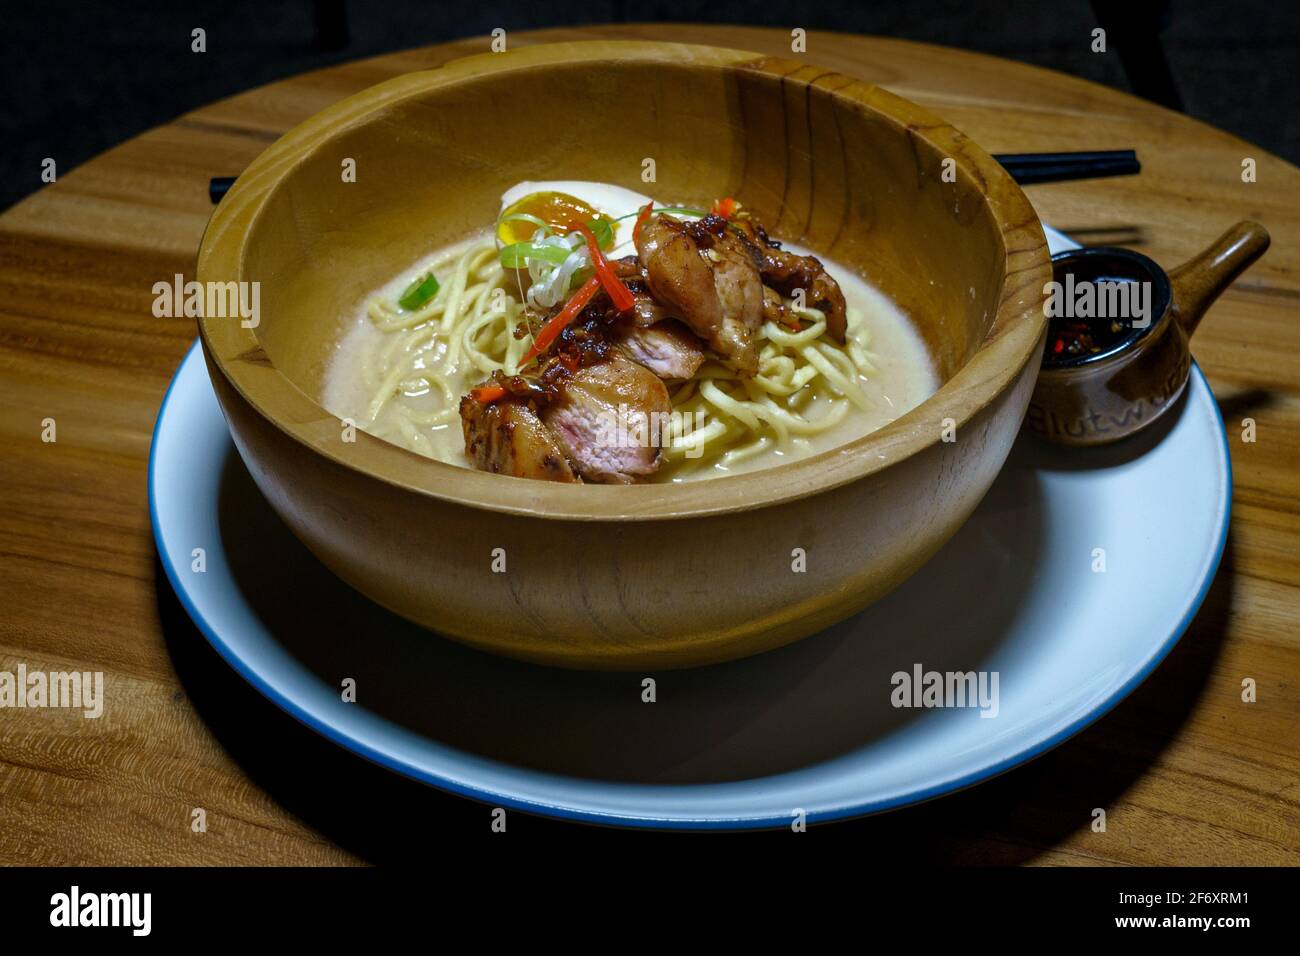 Bowl of Noodle soup with fried chicken Stock Photo